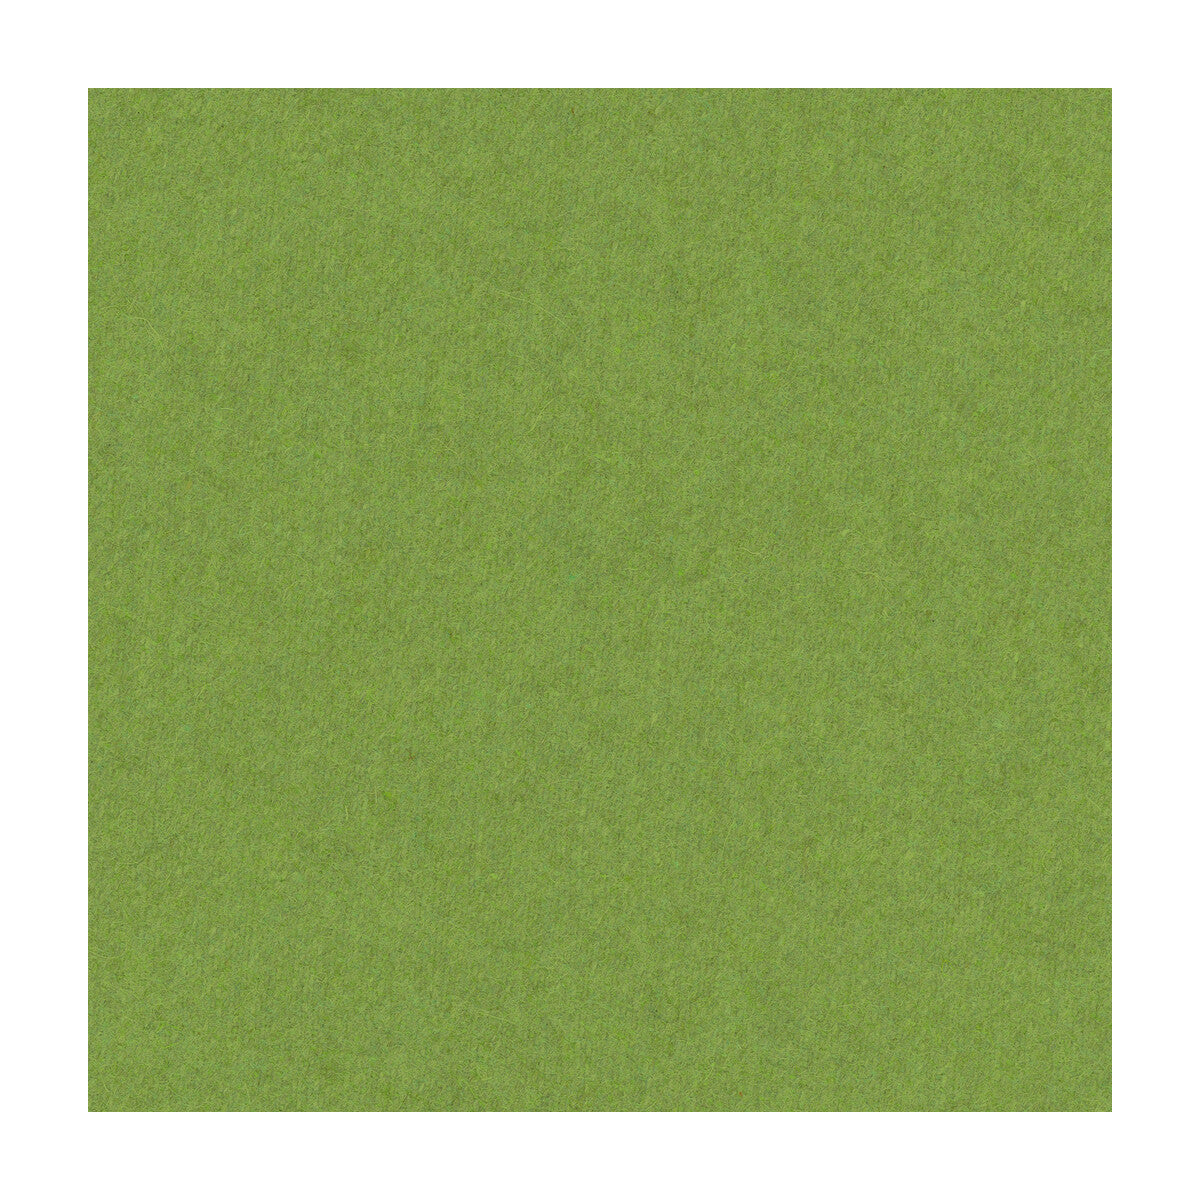 Jefferson Wool fabric in sprout color - pattern 34397.3.0 - by Kravet Contract